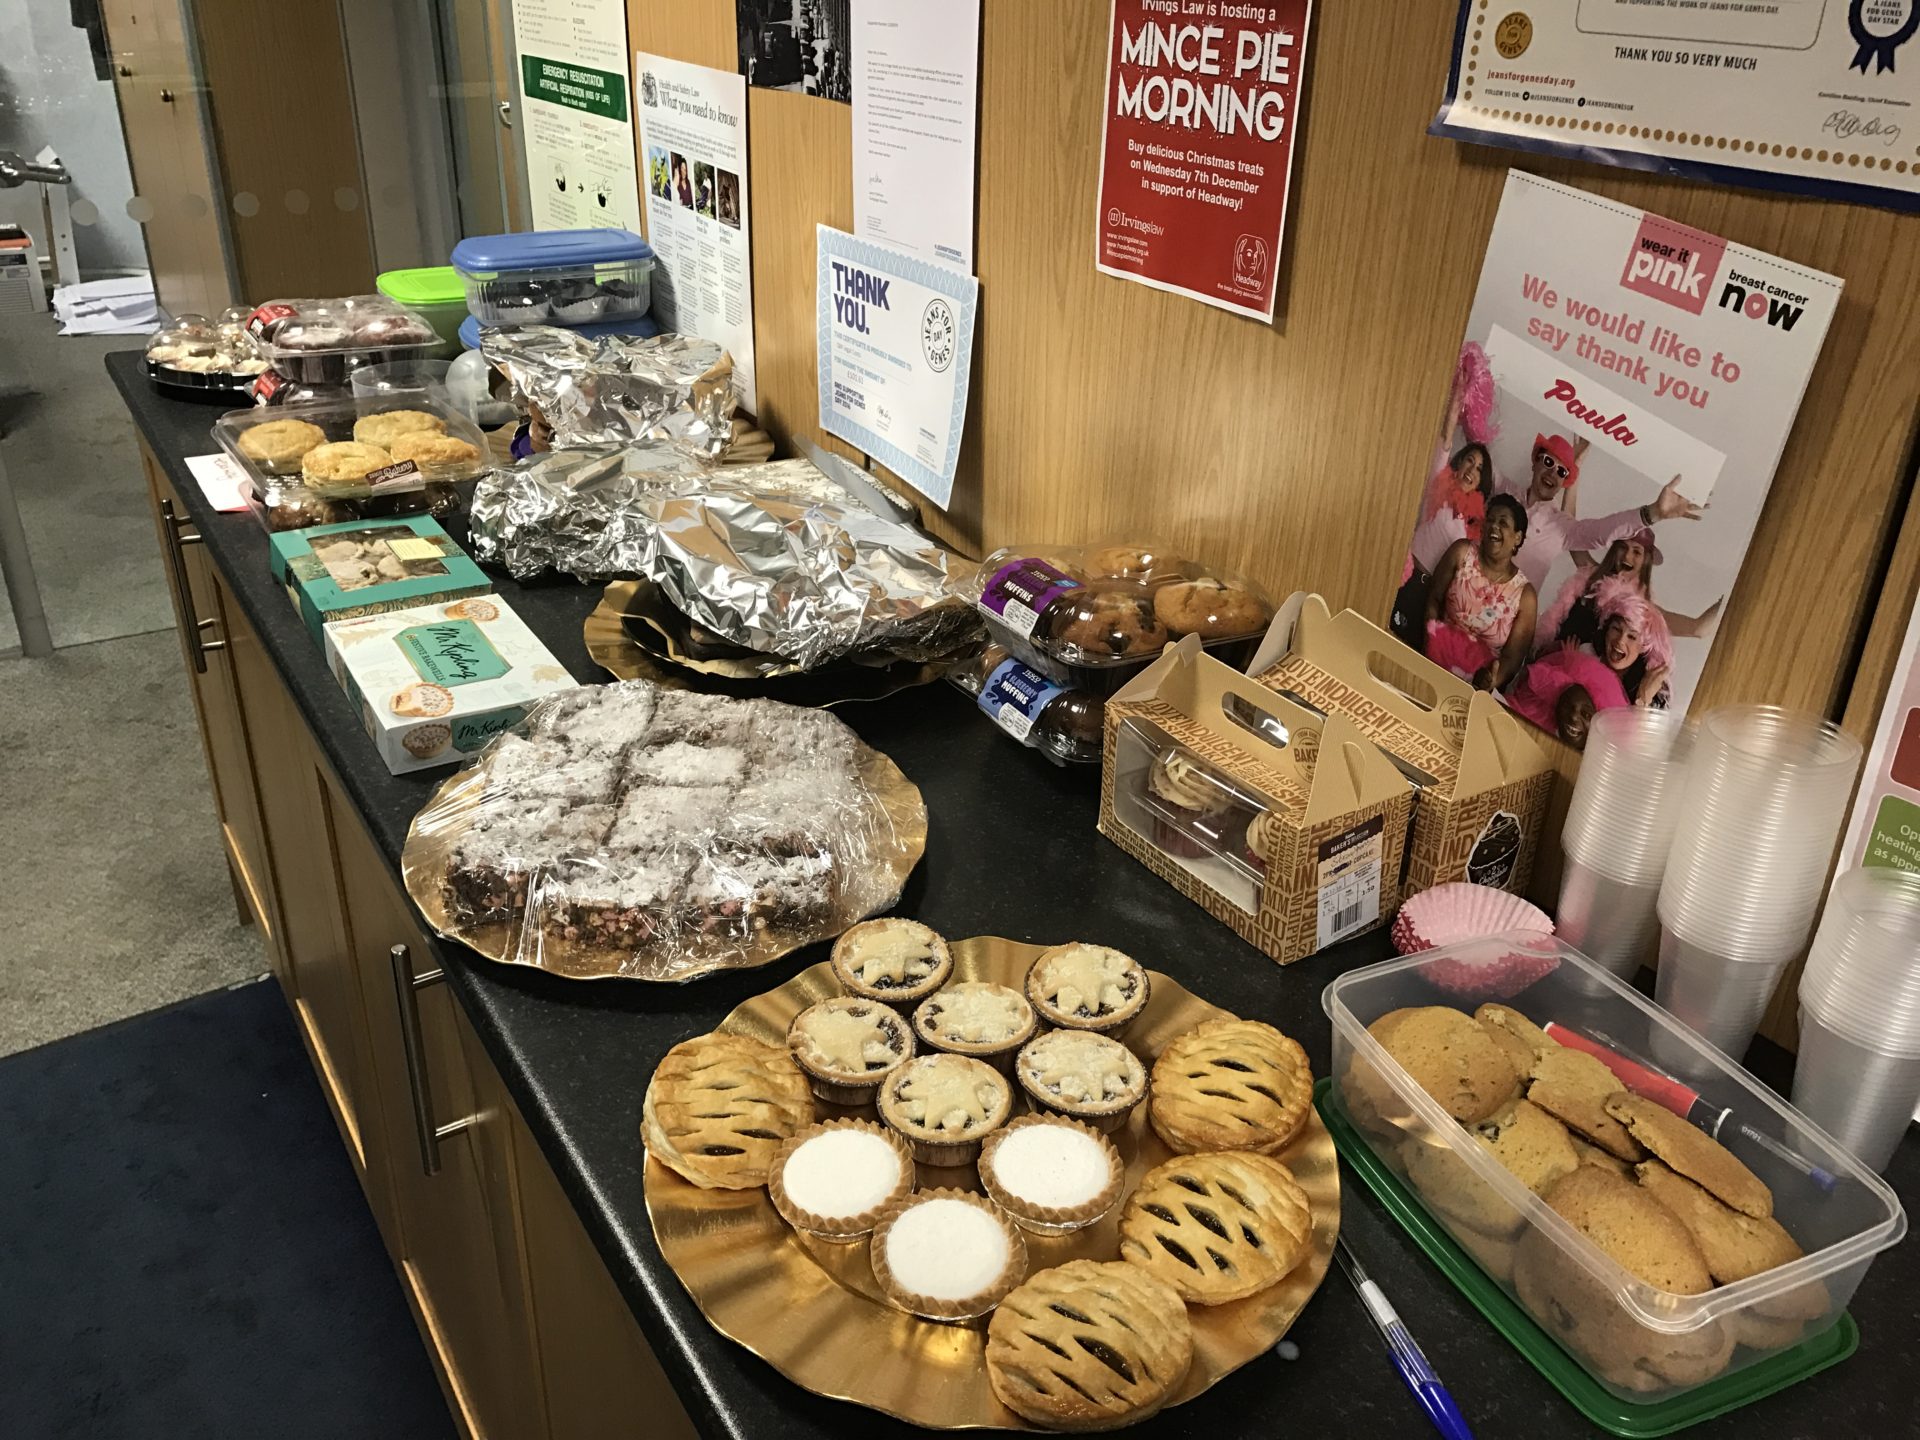 A Mince Pie Morning for Headway